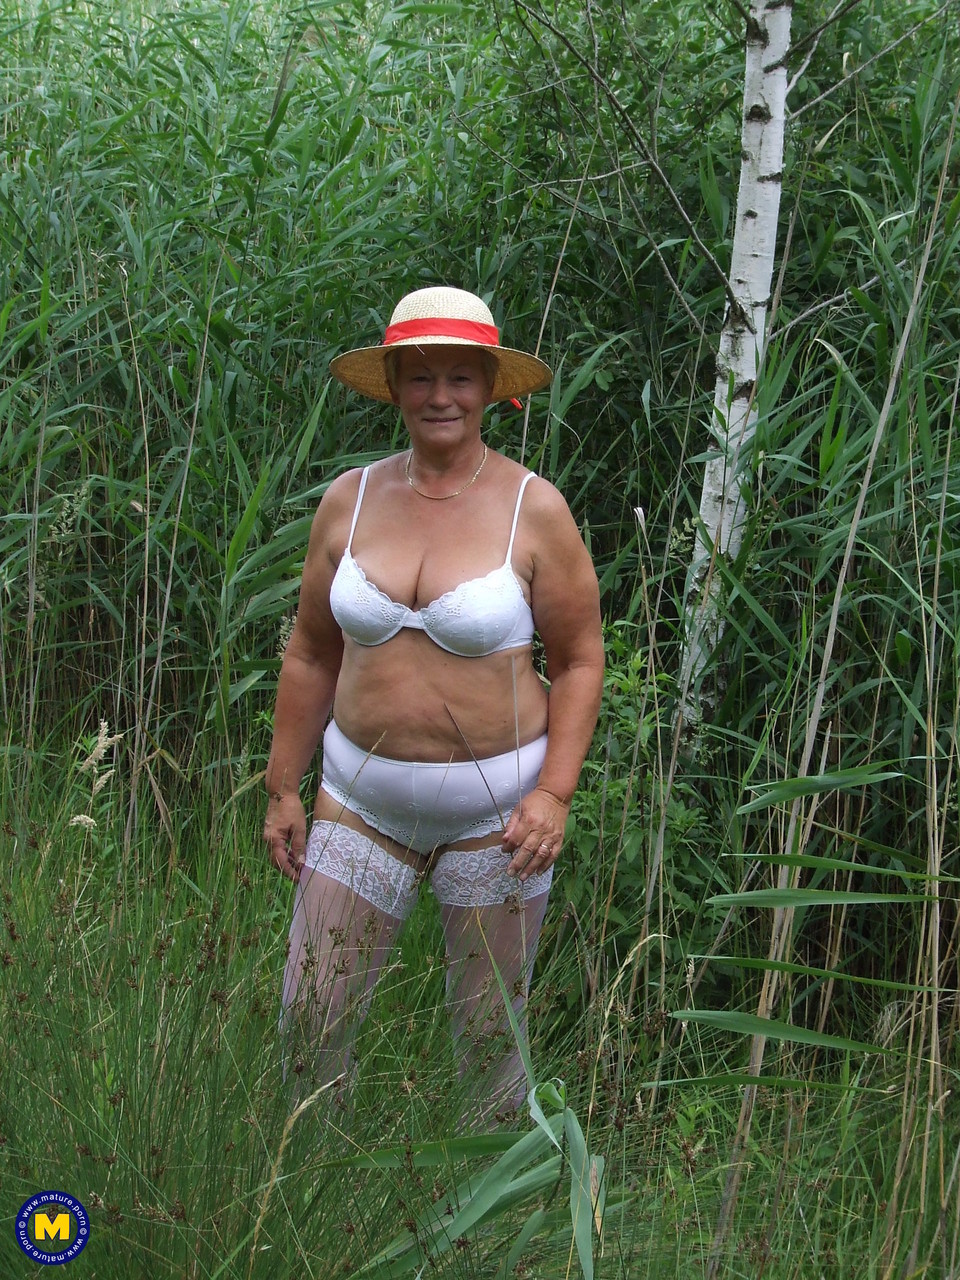 Wild chubby granny Gisela strips to her stockings outdoors & spreads her cunt porn photo #427416344 | Mature NL Pics, Gisela, Chubby, mobile porn